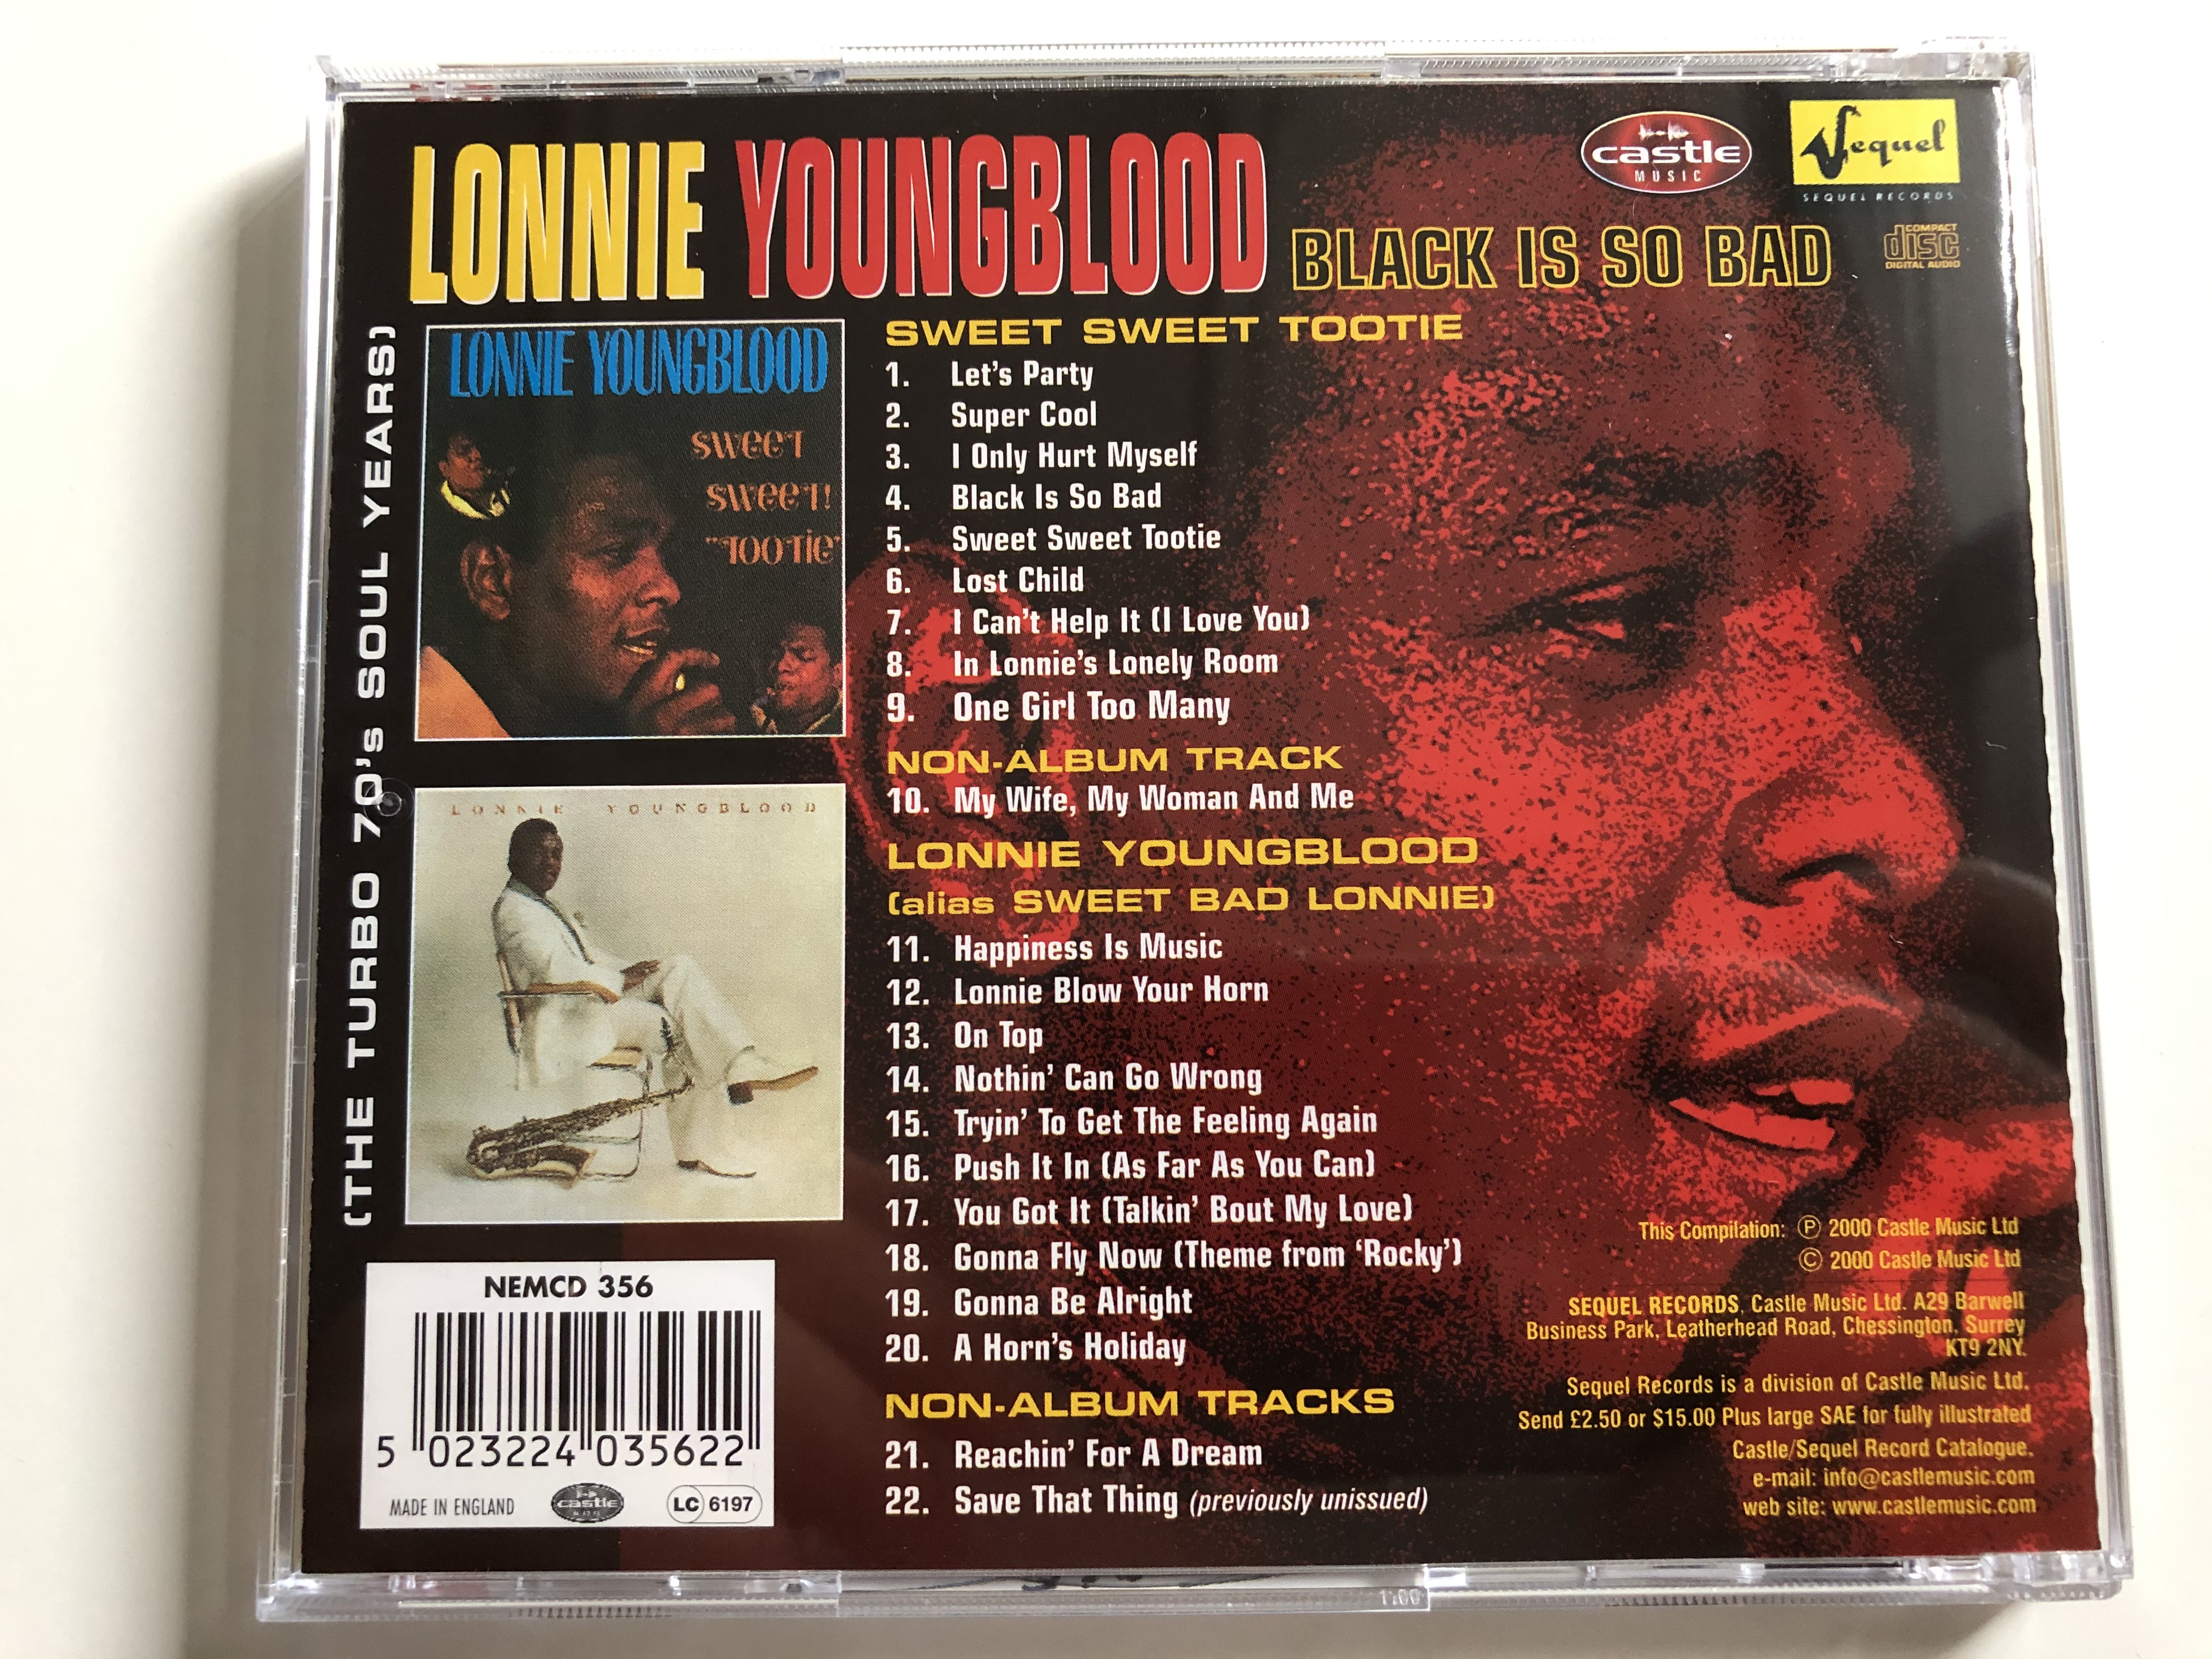 lonnie-youngblood-black-is-so-bad-sequel-records-audio-cd-2000-nemcd-356-7-.jpg